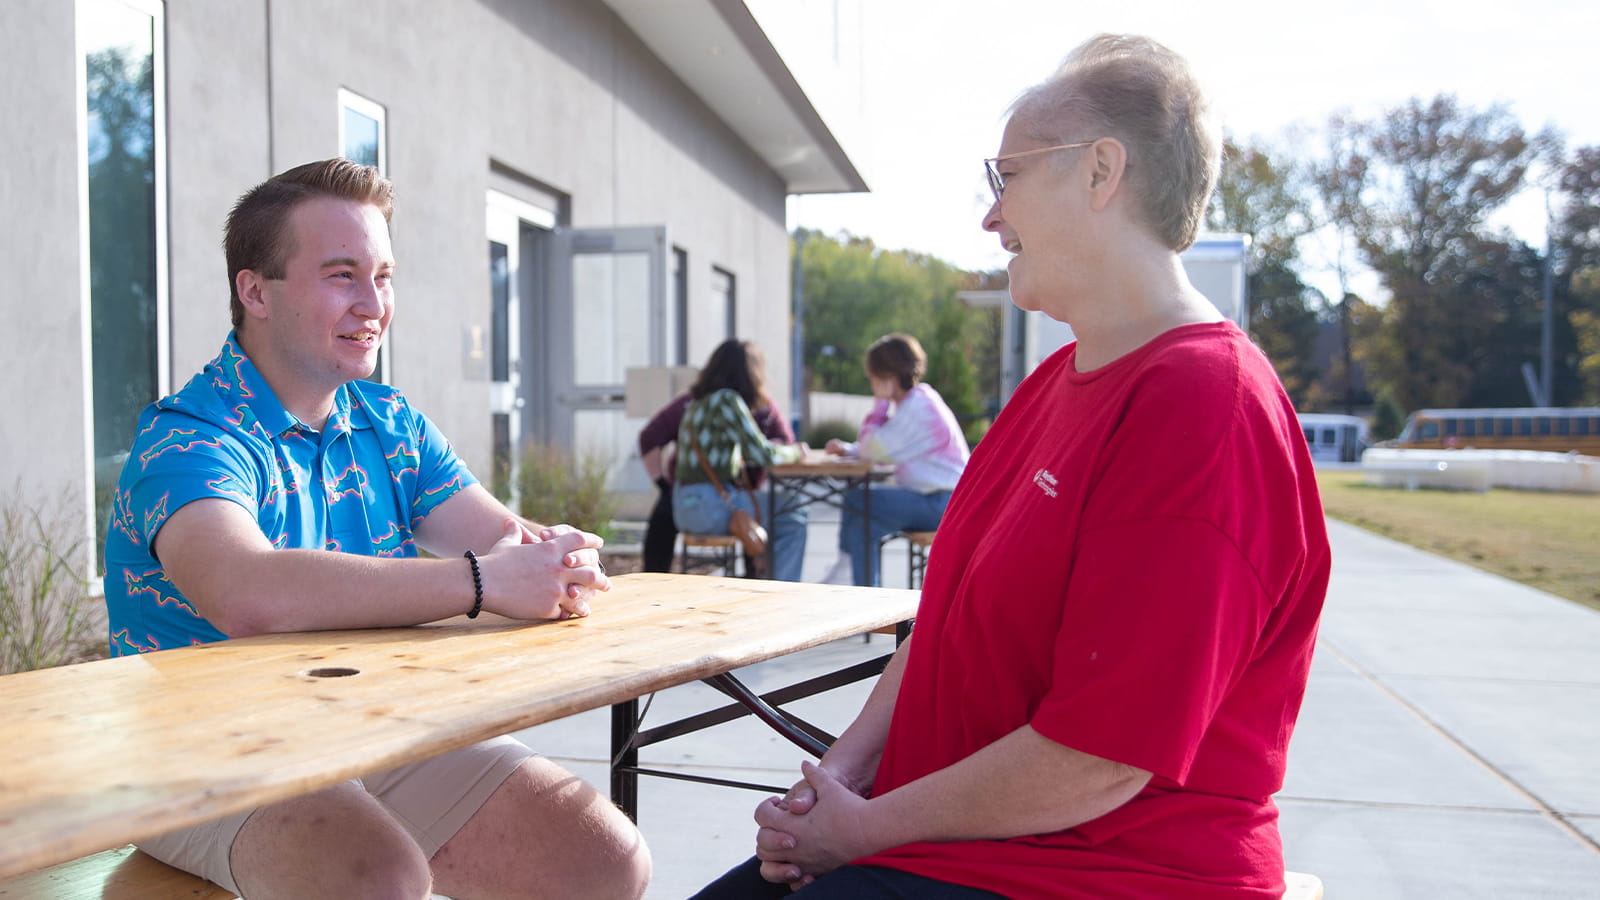 A woman in a red shirt speaks with a young man in a blue polo, sitting across from her at a picnic table.